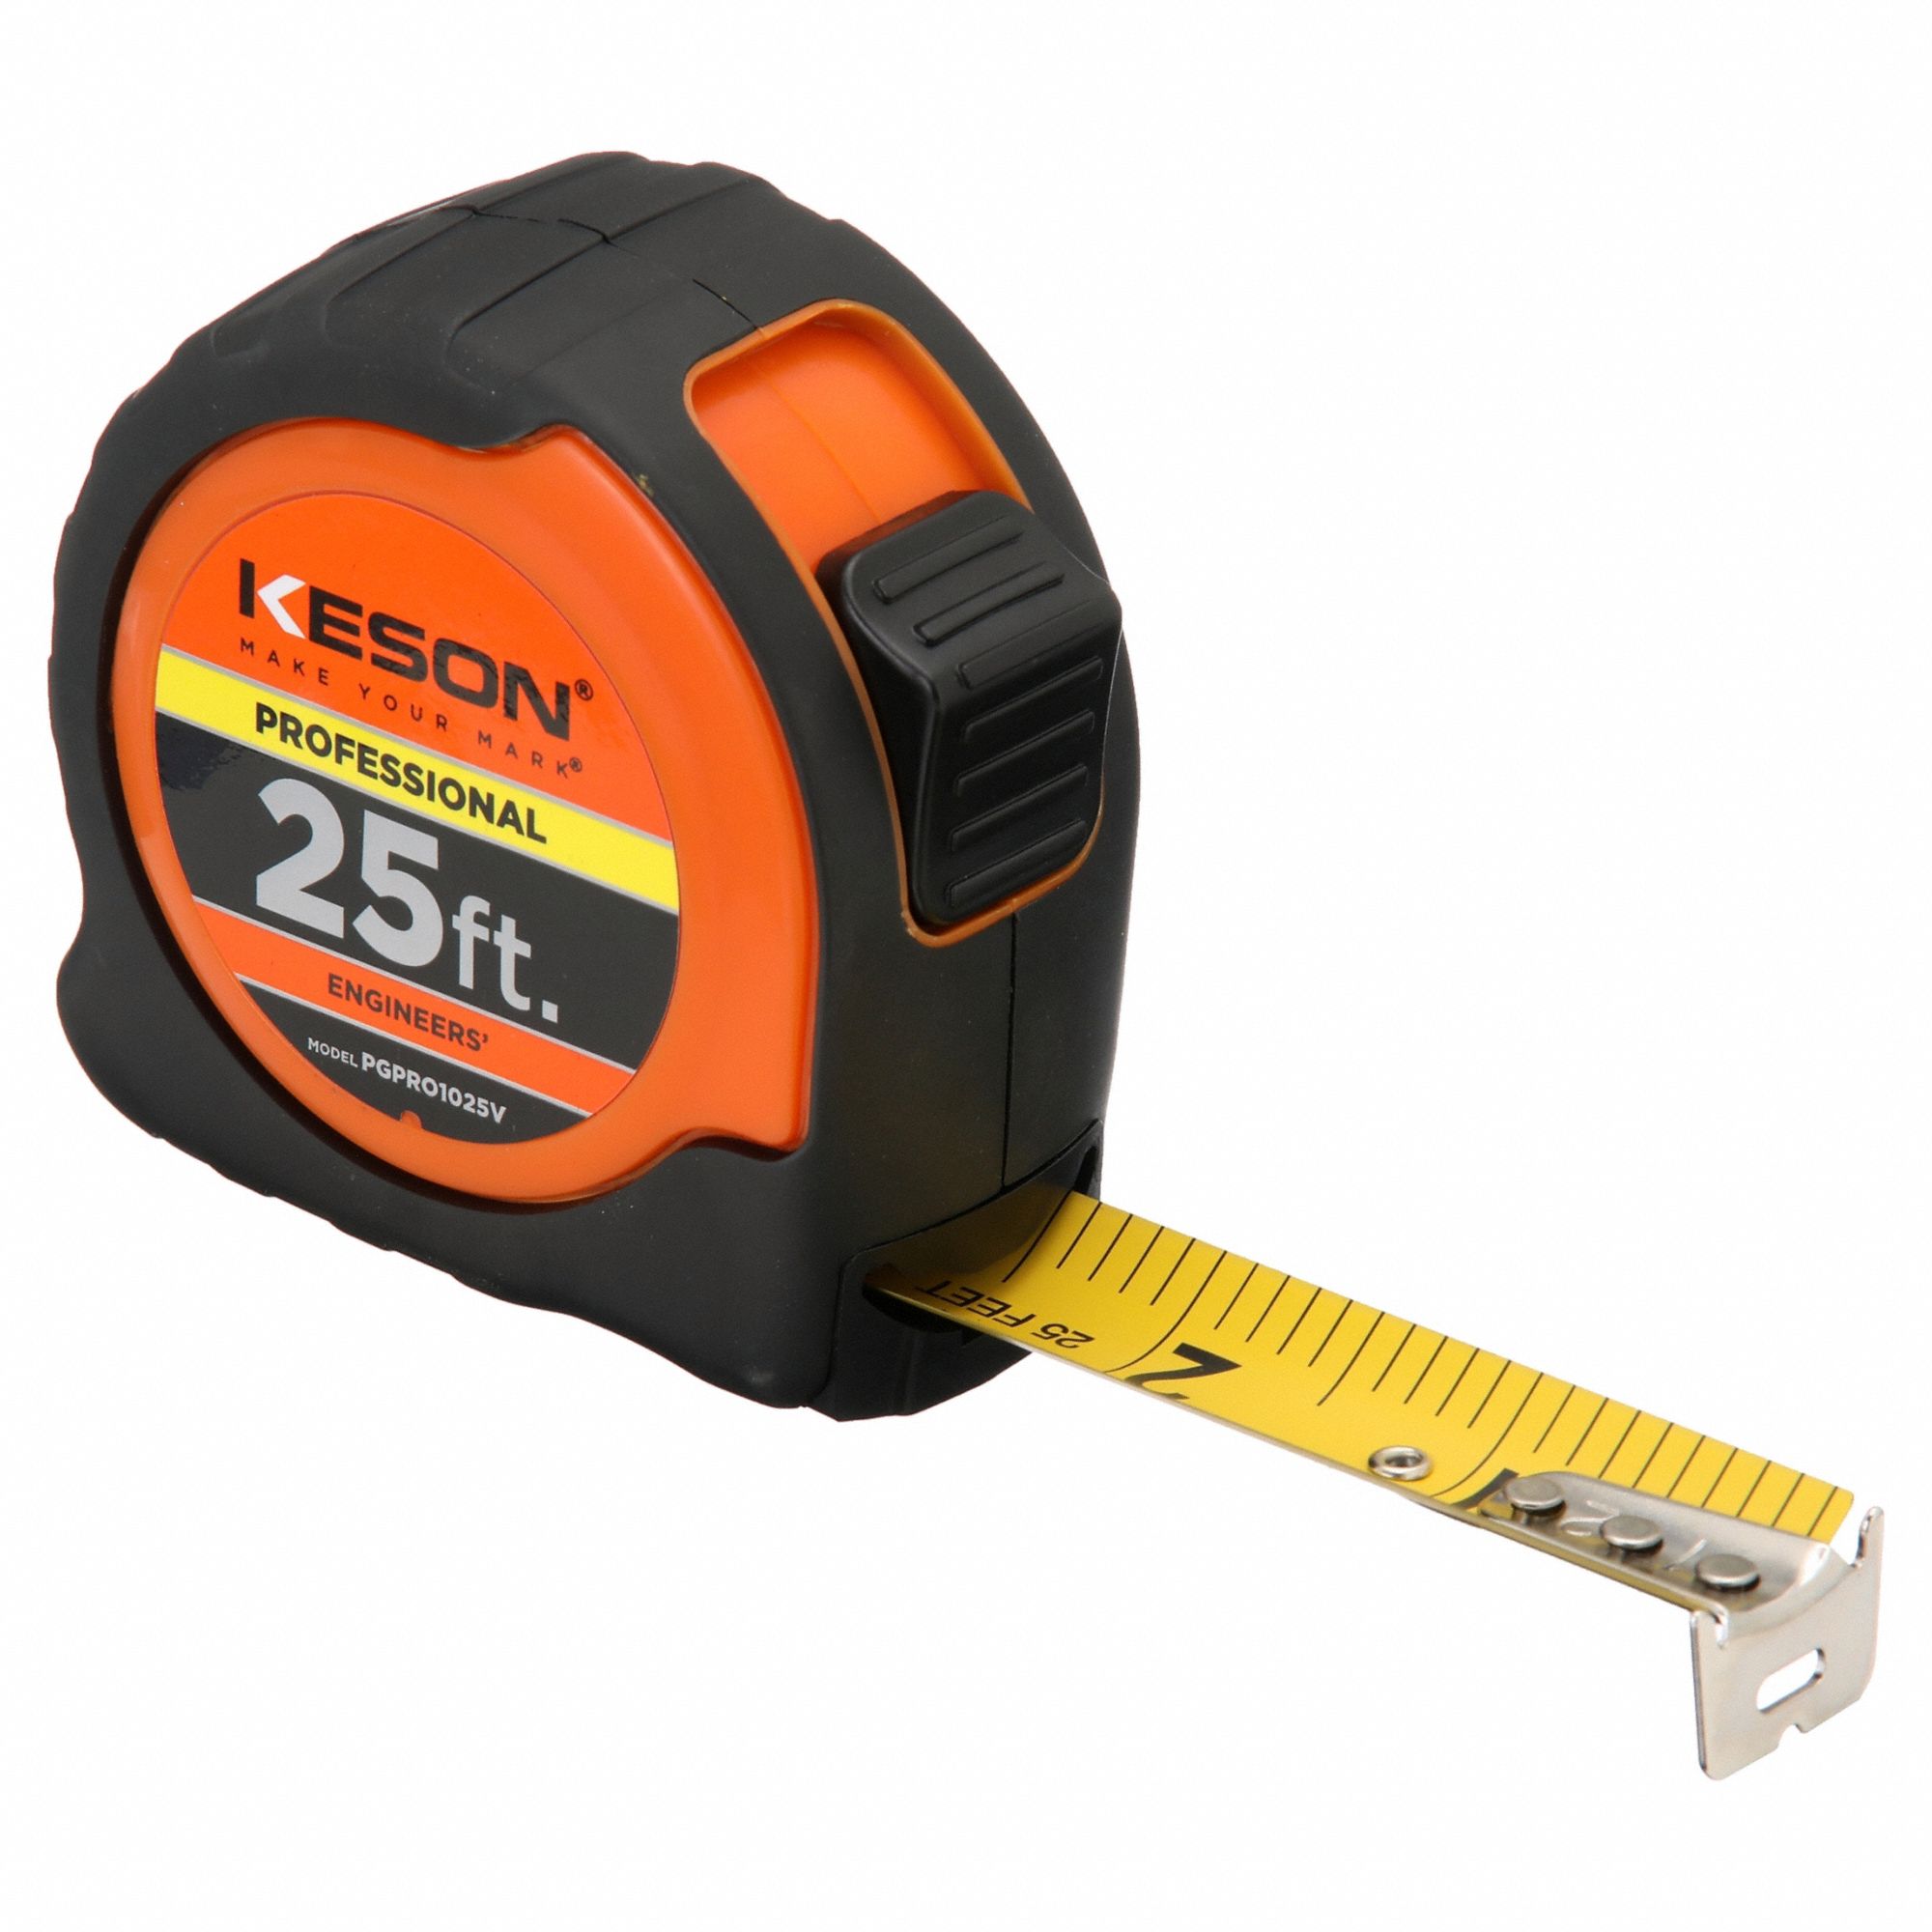 C&R Manufacturing. Keson 25' Tape Measure Extra Wide